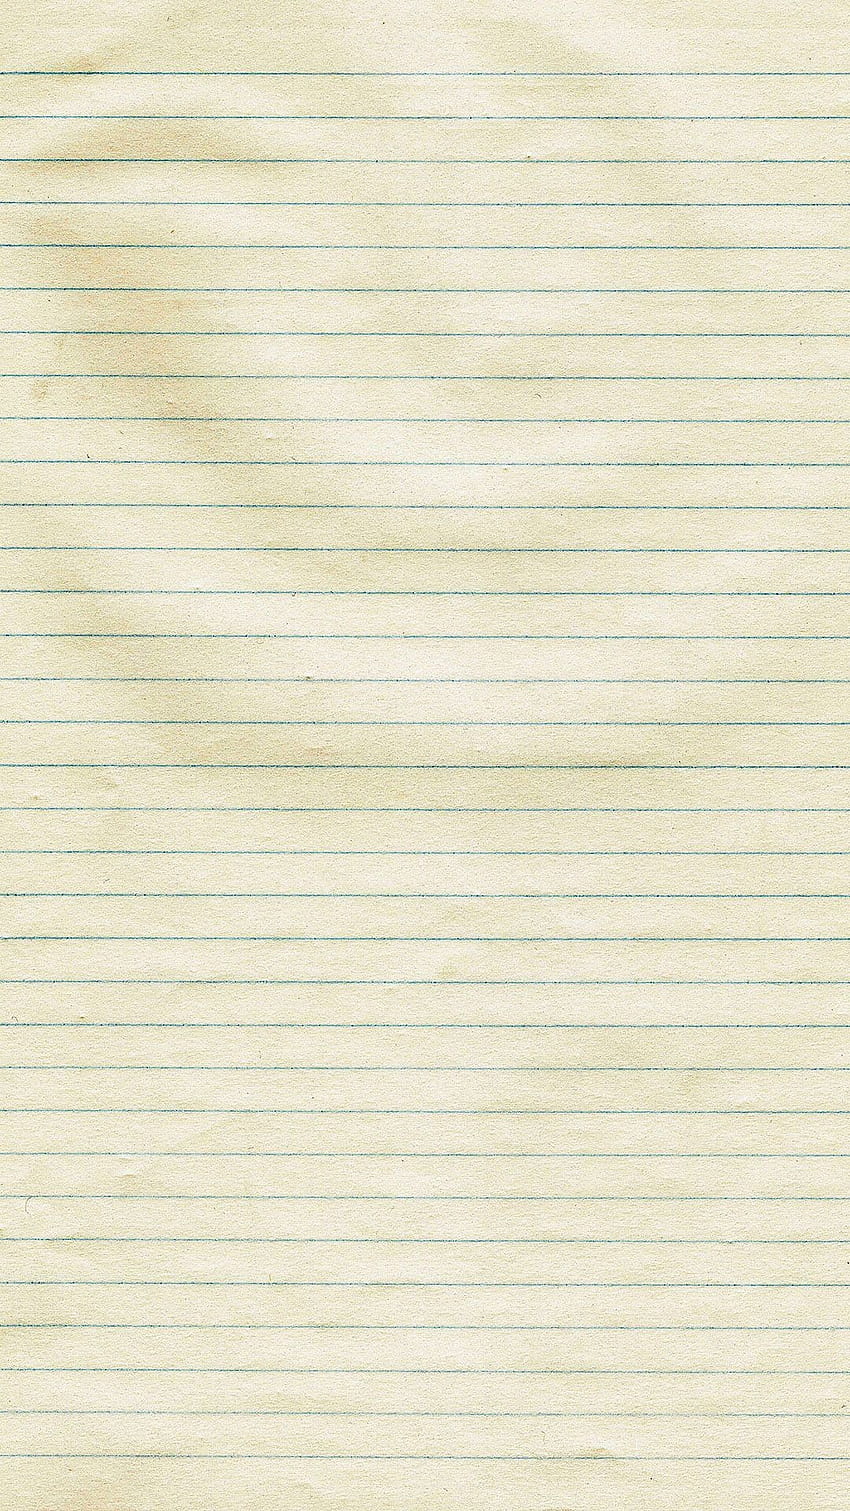 Notebook paper. Collection of Texture Backgrounds for iPhone - @mobile9 HD phone wallpaper